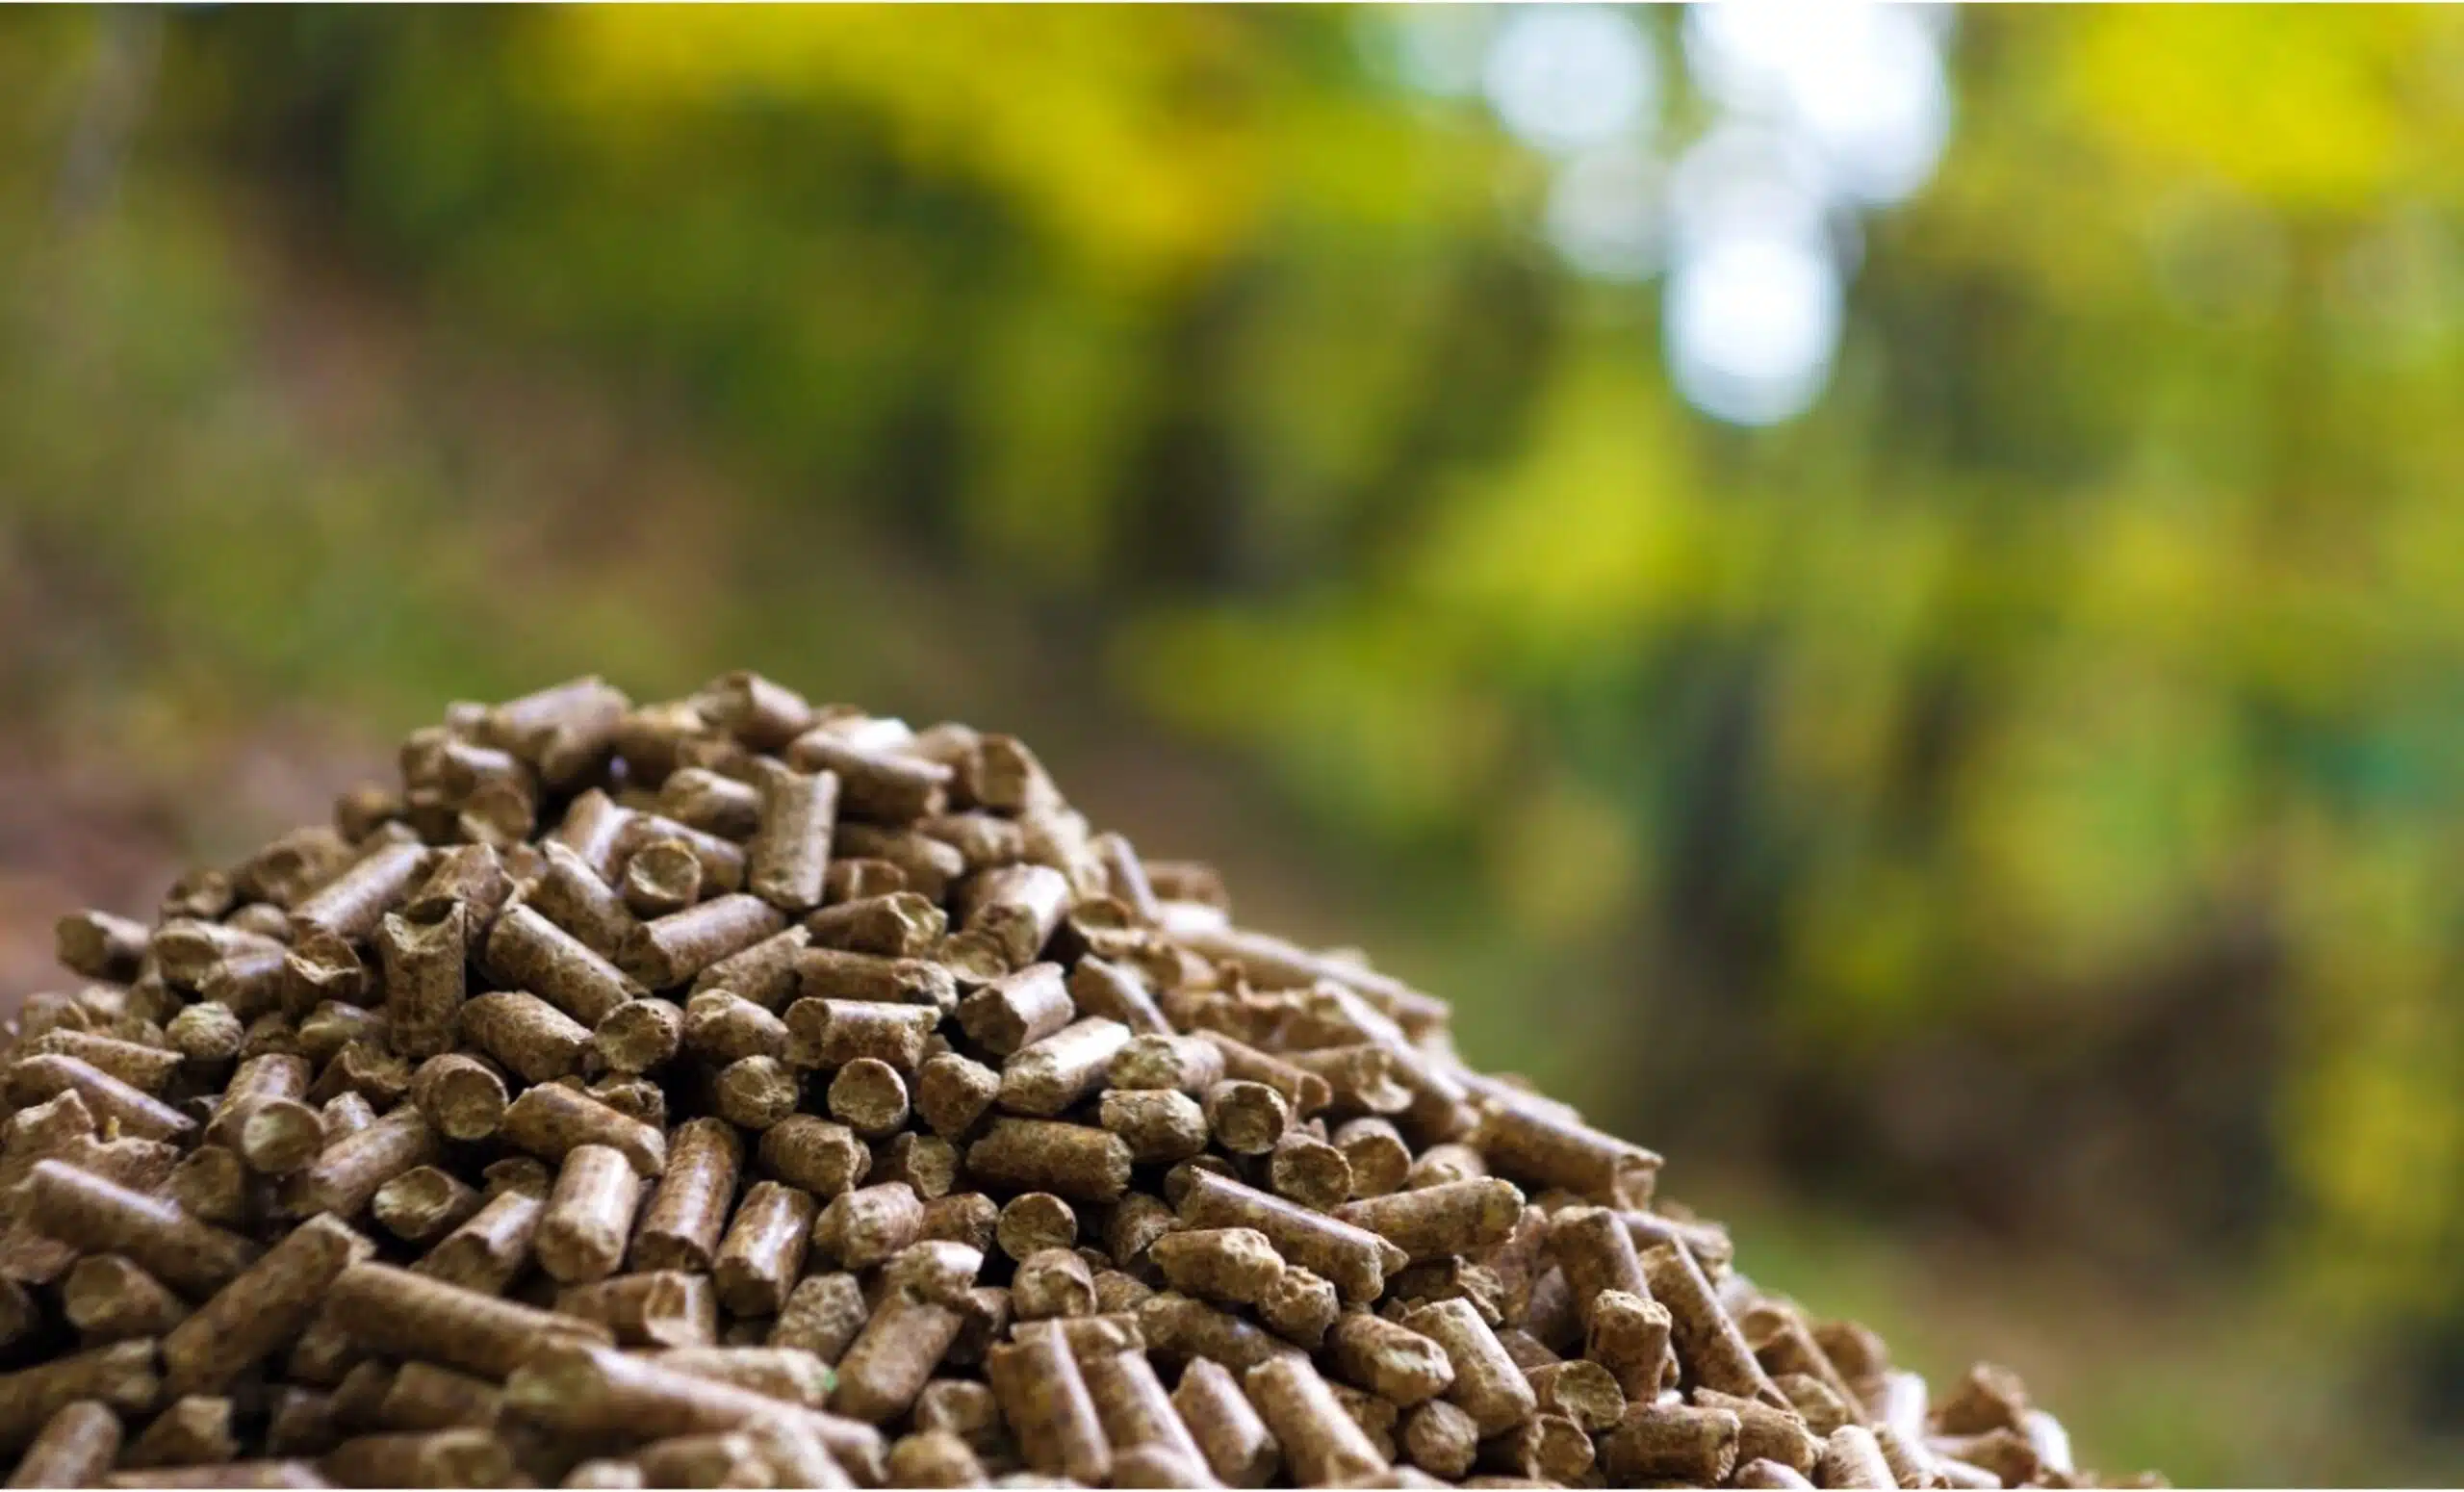 A small pile of biomass pellets with oiut of focus vegetation in the background